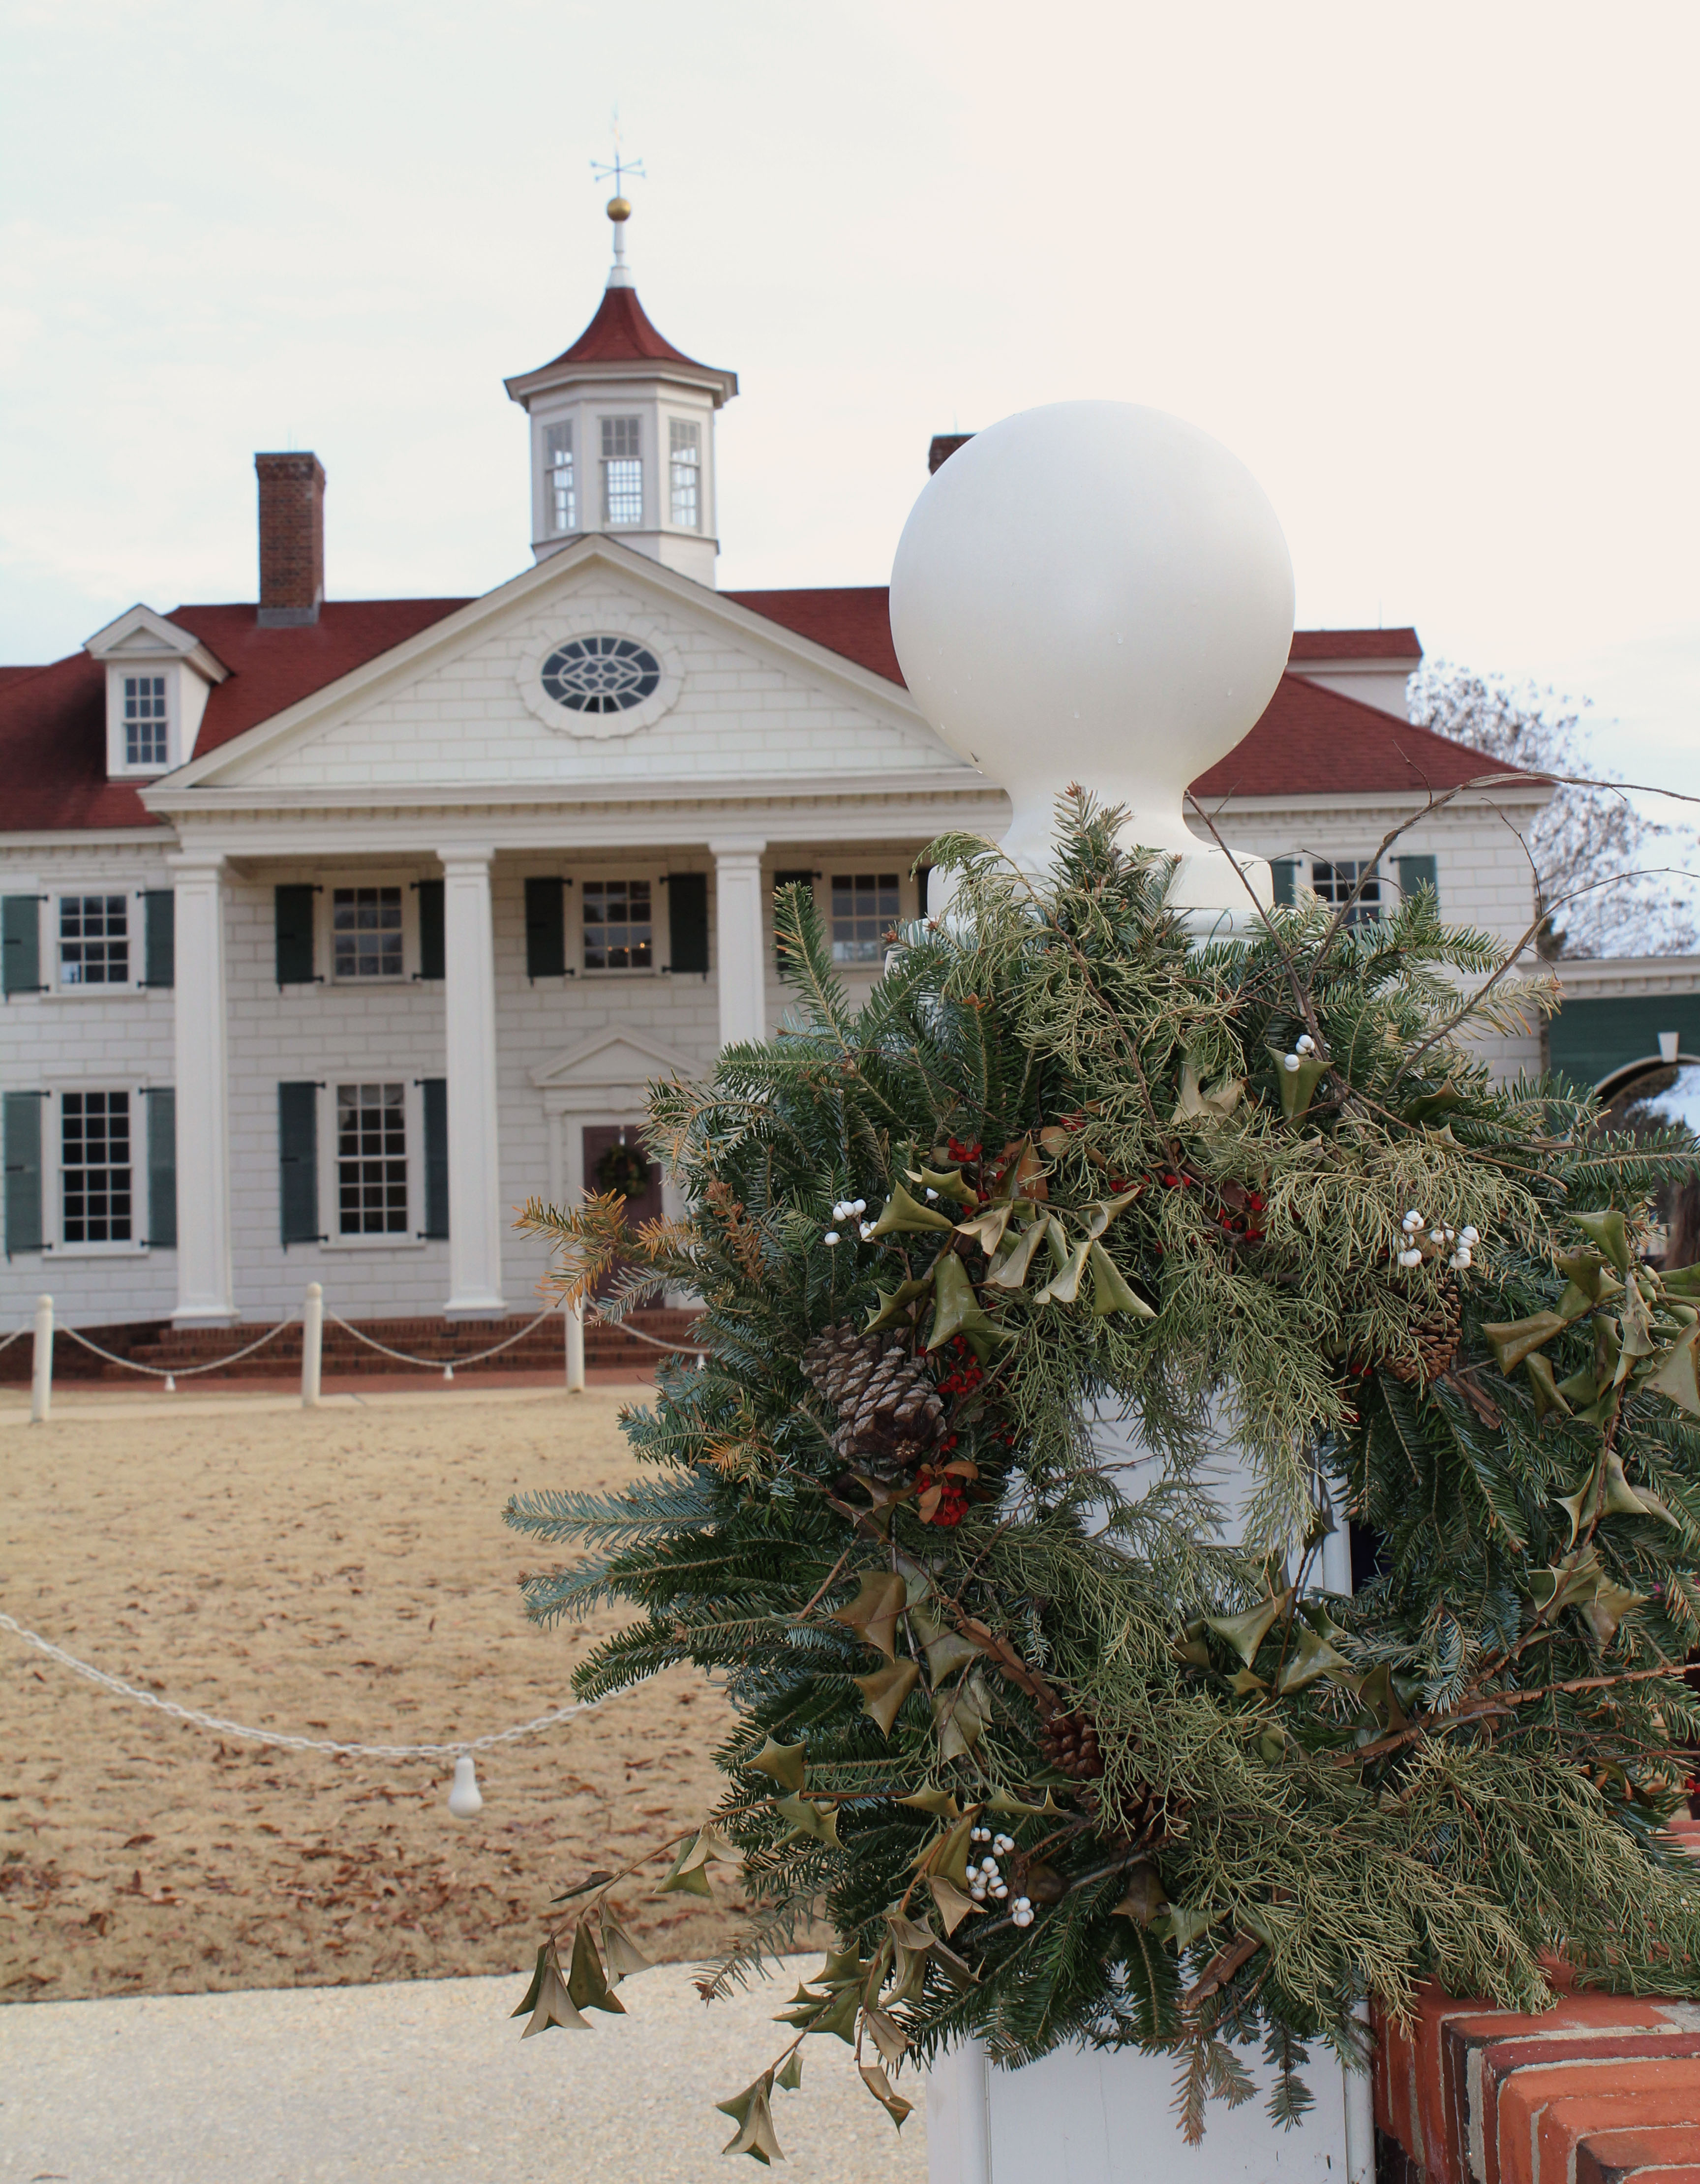 A Colonial Christmas at the American Village